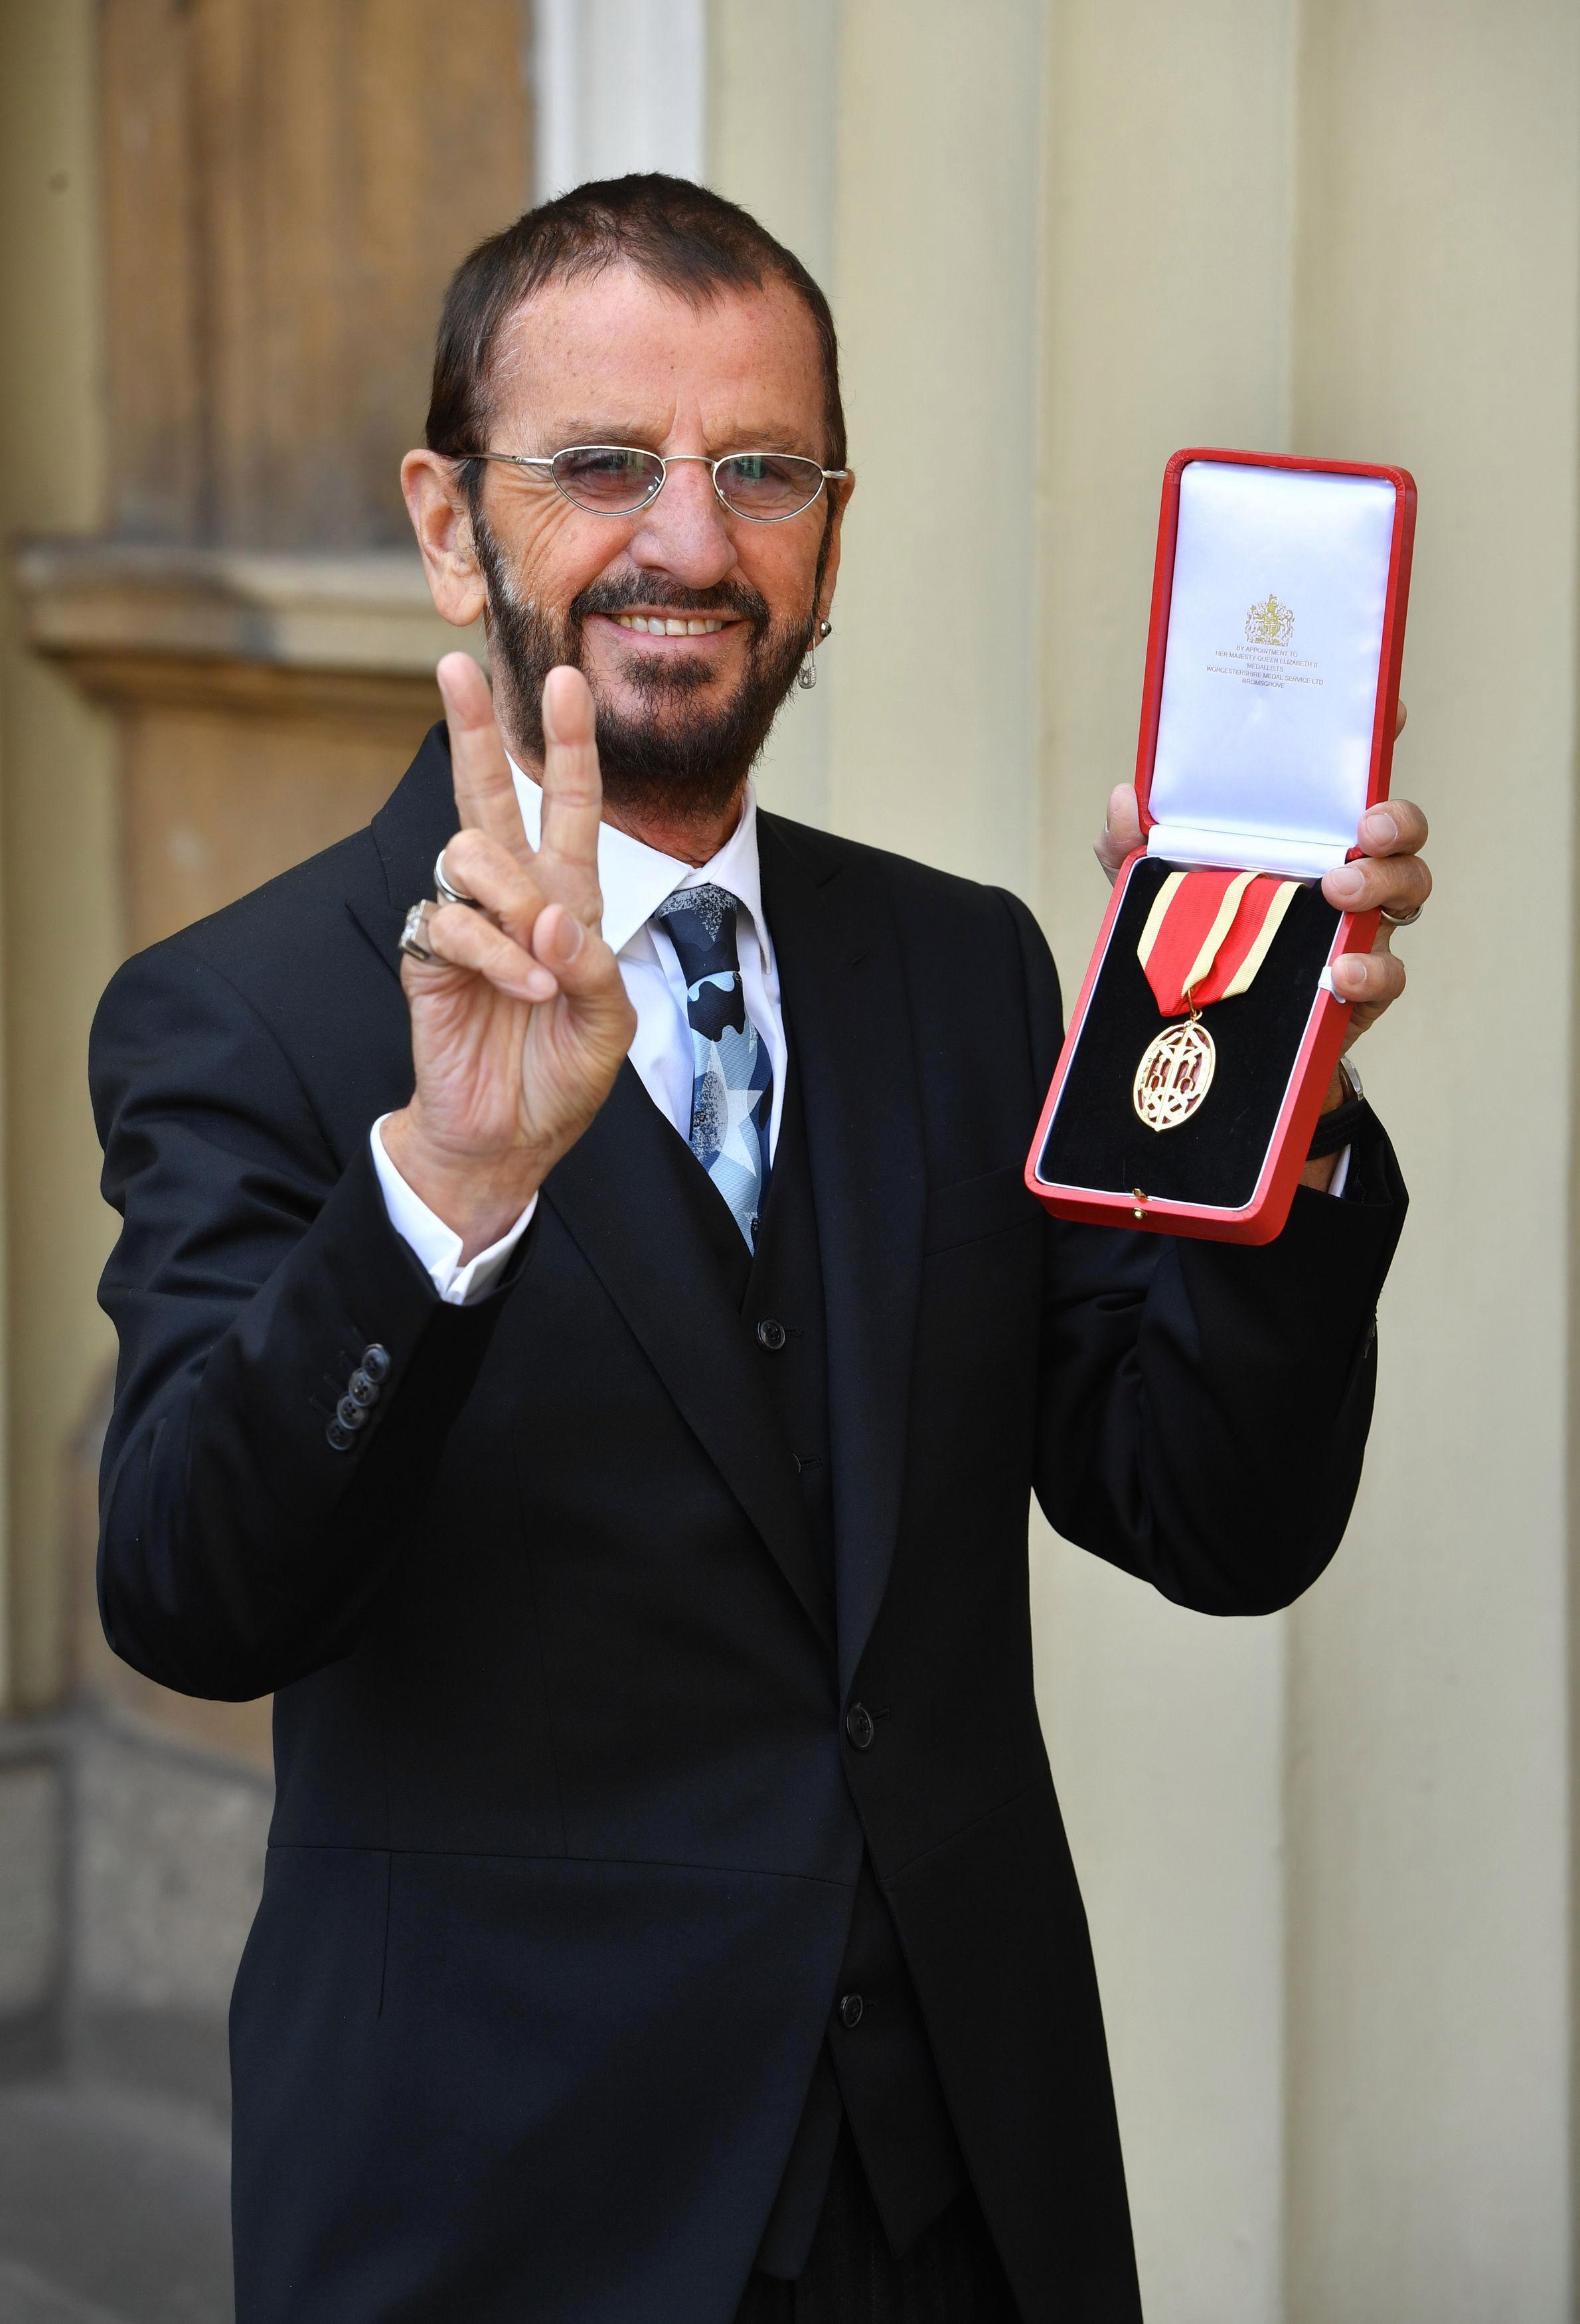  Sir Richard Starkey, also known as Ringo Starr, after he was awarded a Knighthood during an Investiture ceremony at Buckingham Palace, London